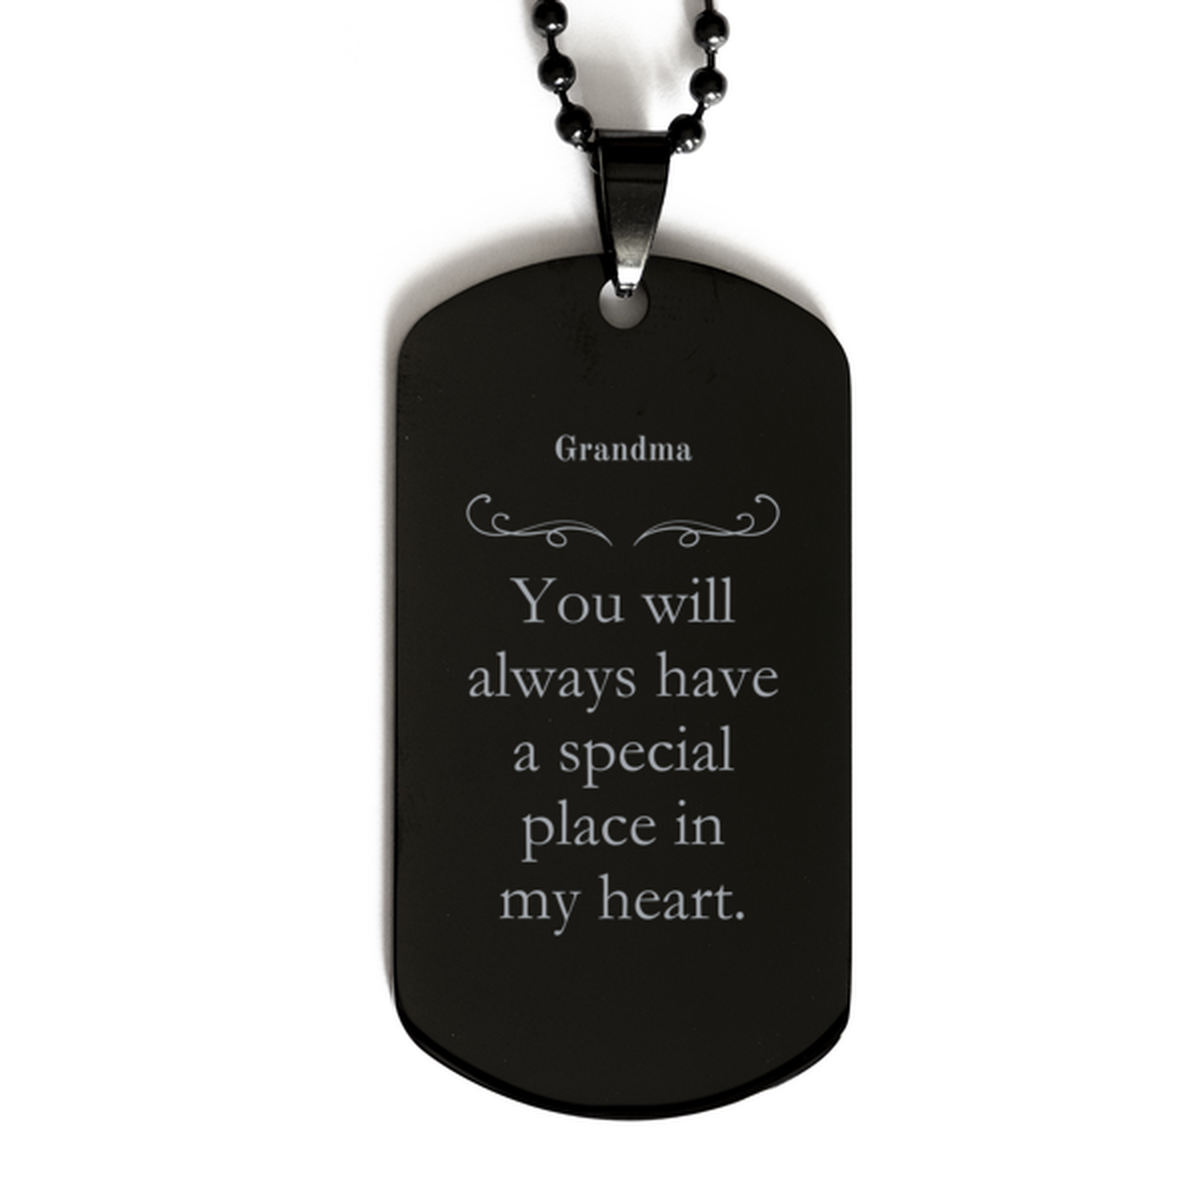 Grandma Dog Tag Necklace Always in My Heart Engraved Gift for Her Birthday, Christmas, Holidays, Inspirational Jewelry for Grandma